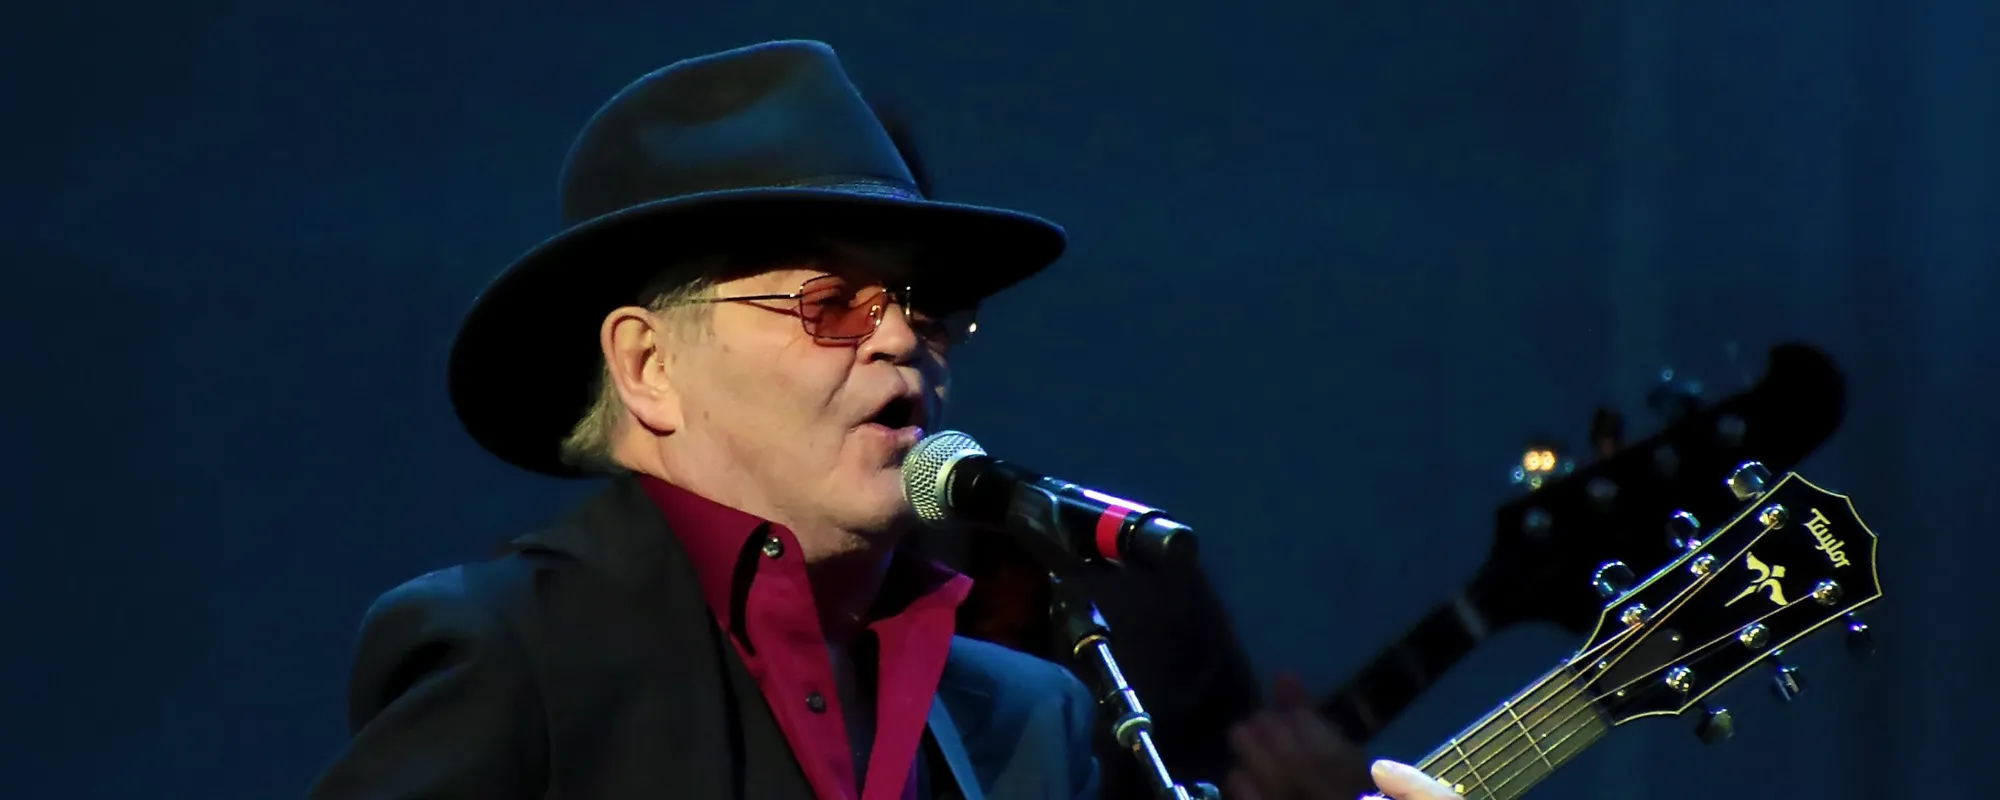 Listen: The Monkees’ Micky Dolenz Covering R.E.M.’s 1991 Hit “Shiny Happy People”